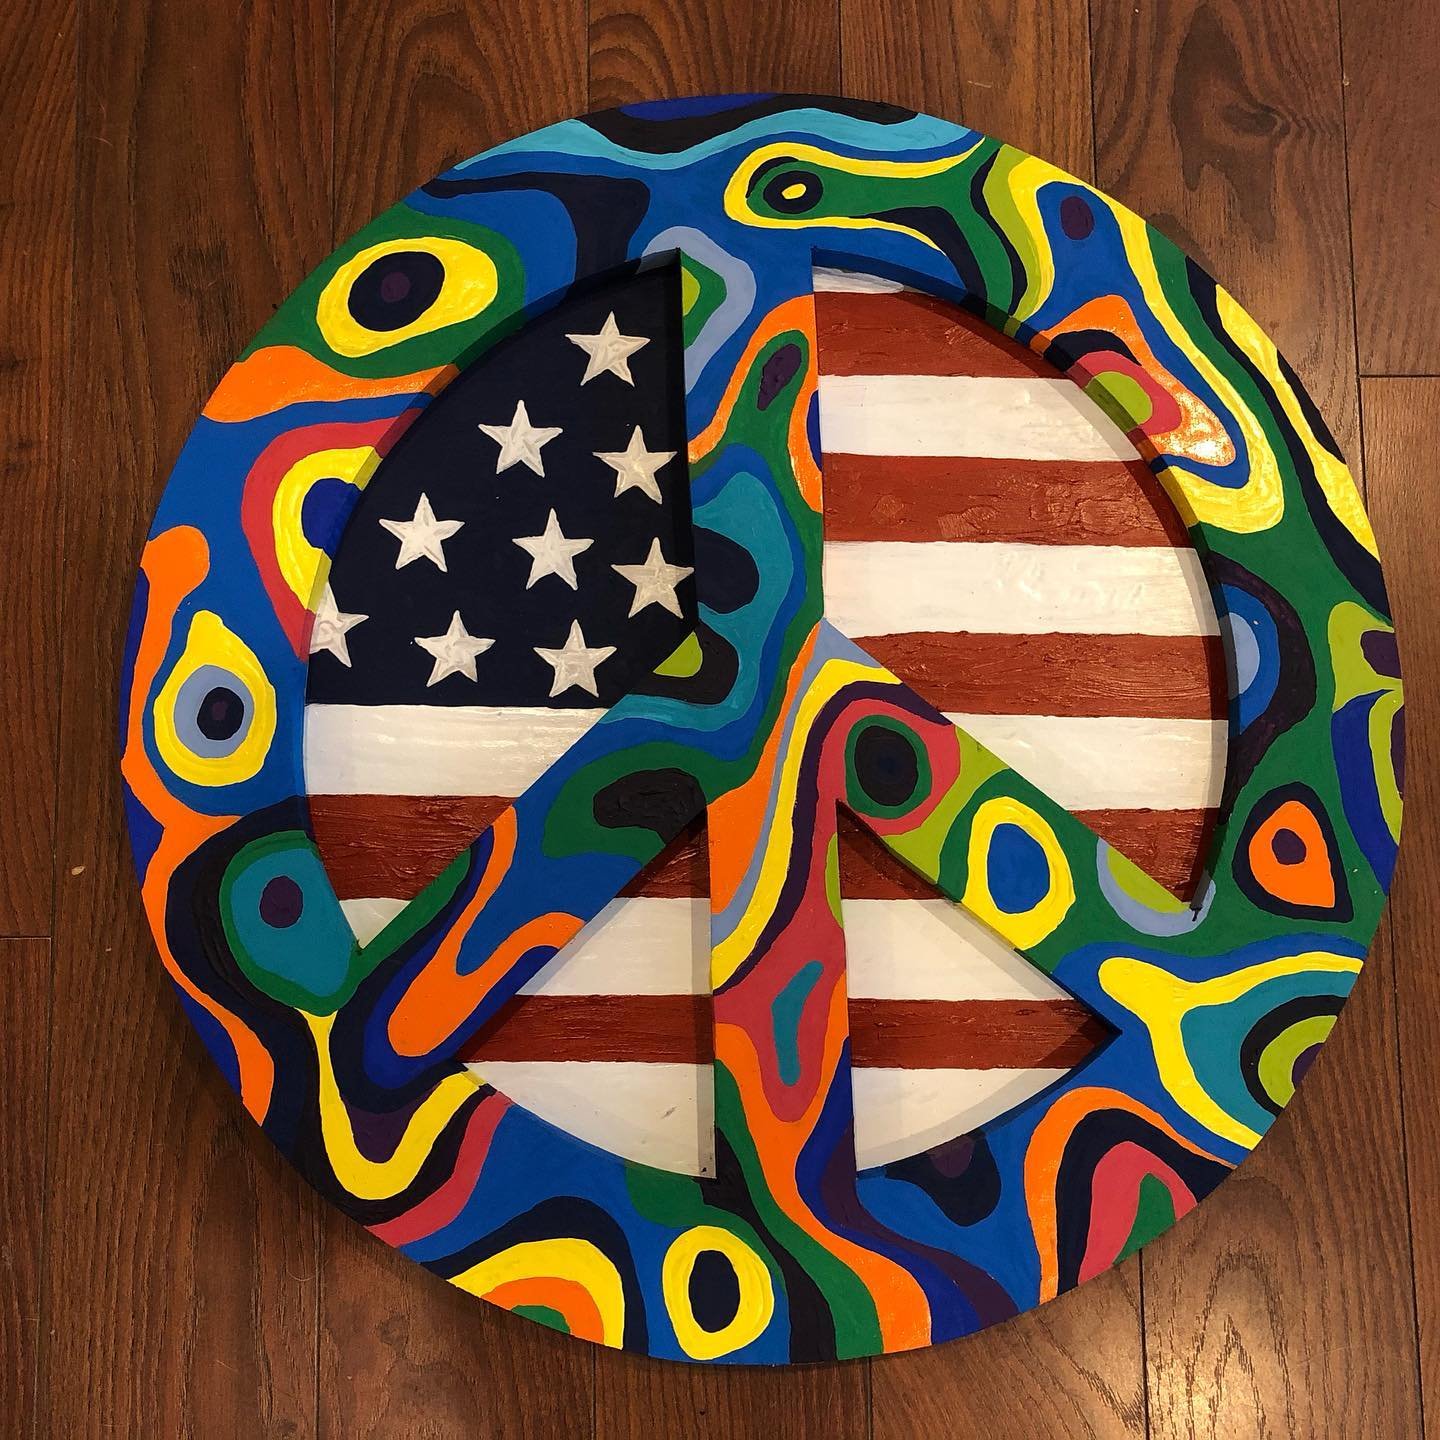 First #layered sign i&rsquo;ve made. Pretty happy with the result! I call this one &ldquo;#AllThePrettyColors.&rdquo; #Acrylic on wood, 22&rdquo; in diameter, $80. #sturgillsimpsonlyrics #usa #patriotic #peacesign #peaceofart #peaceofartdecor